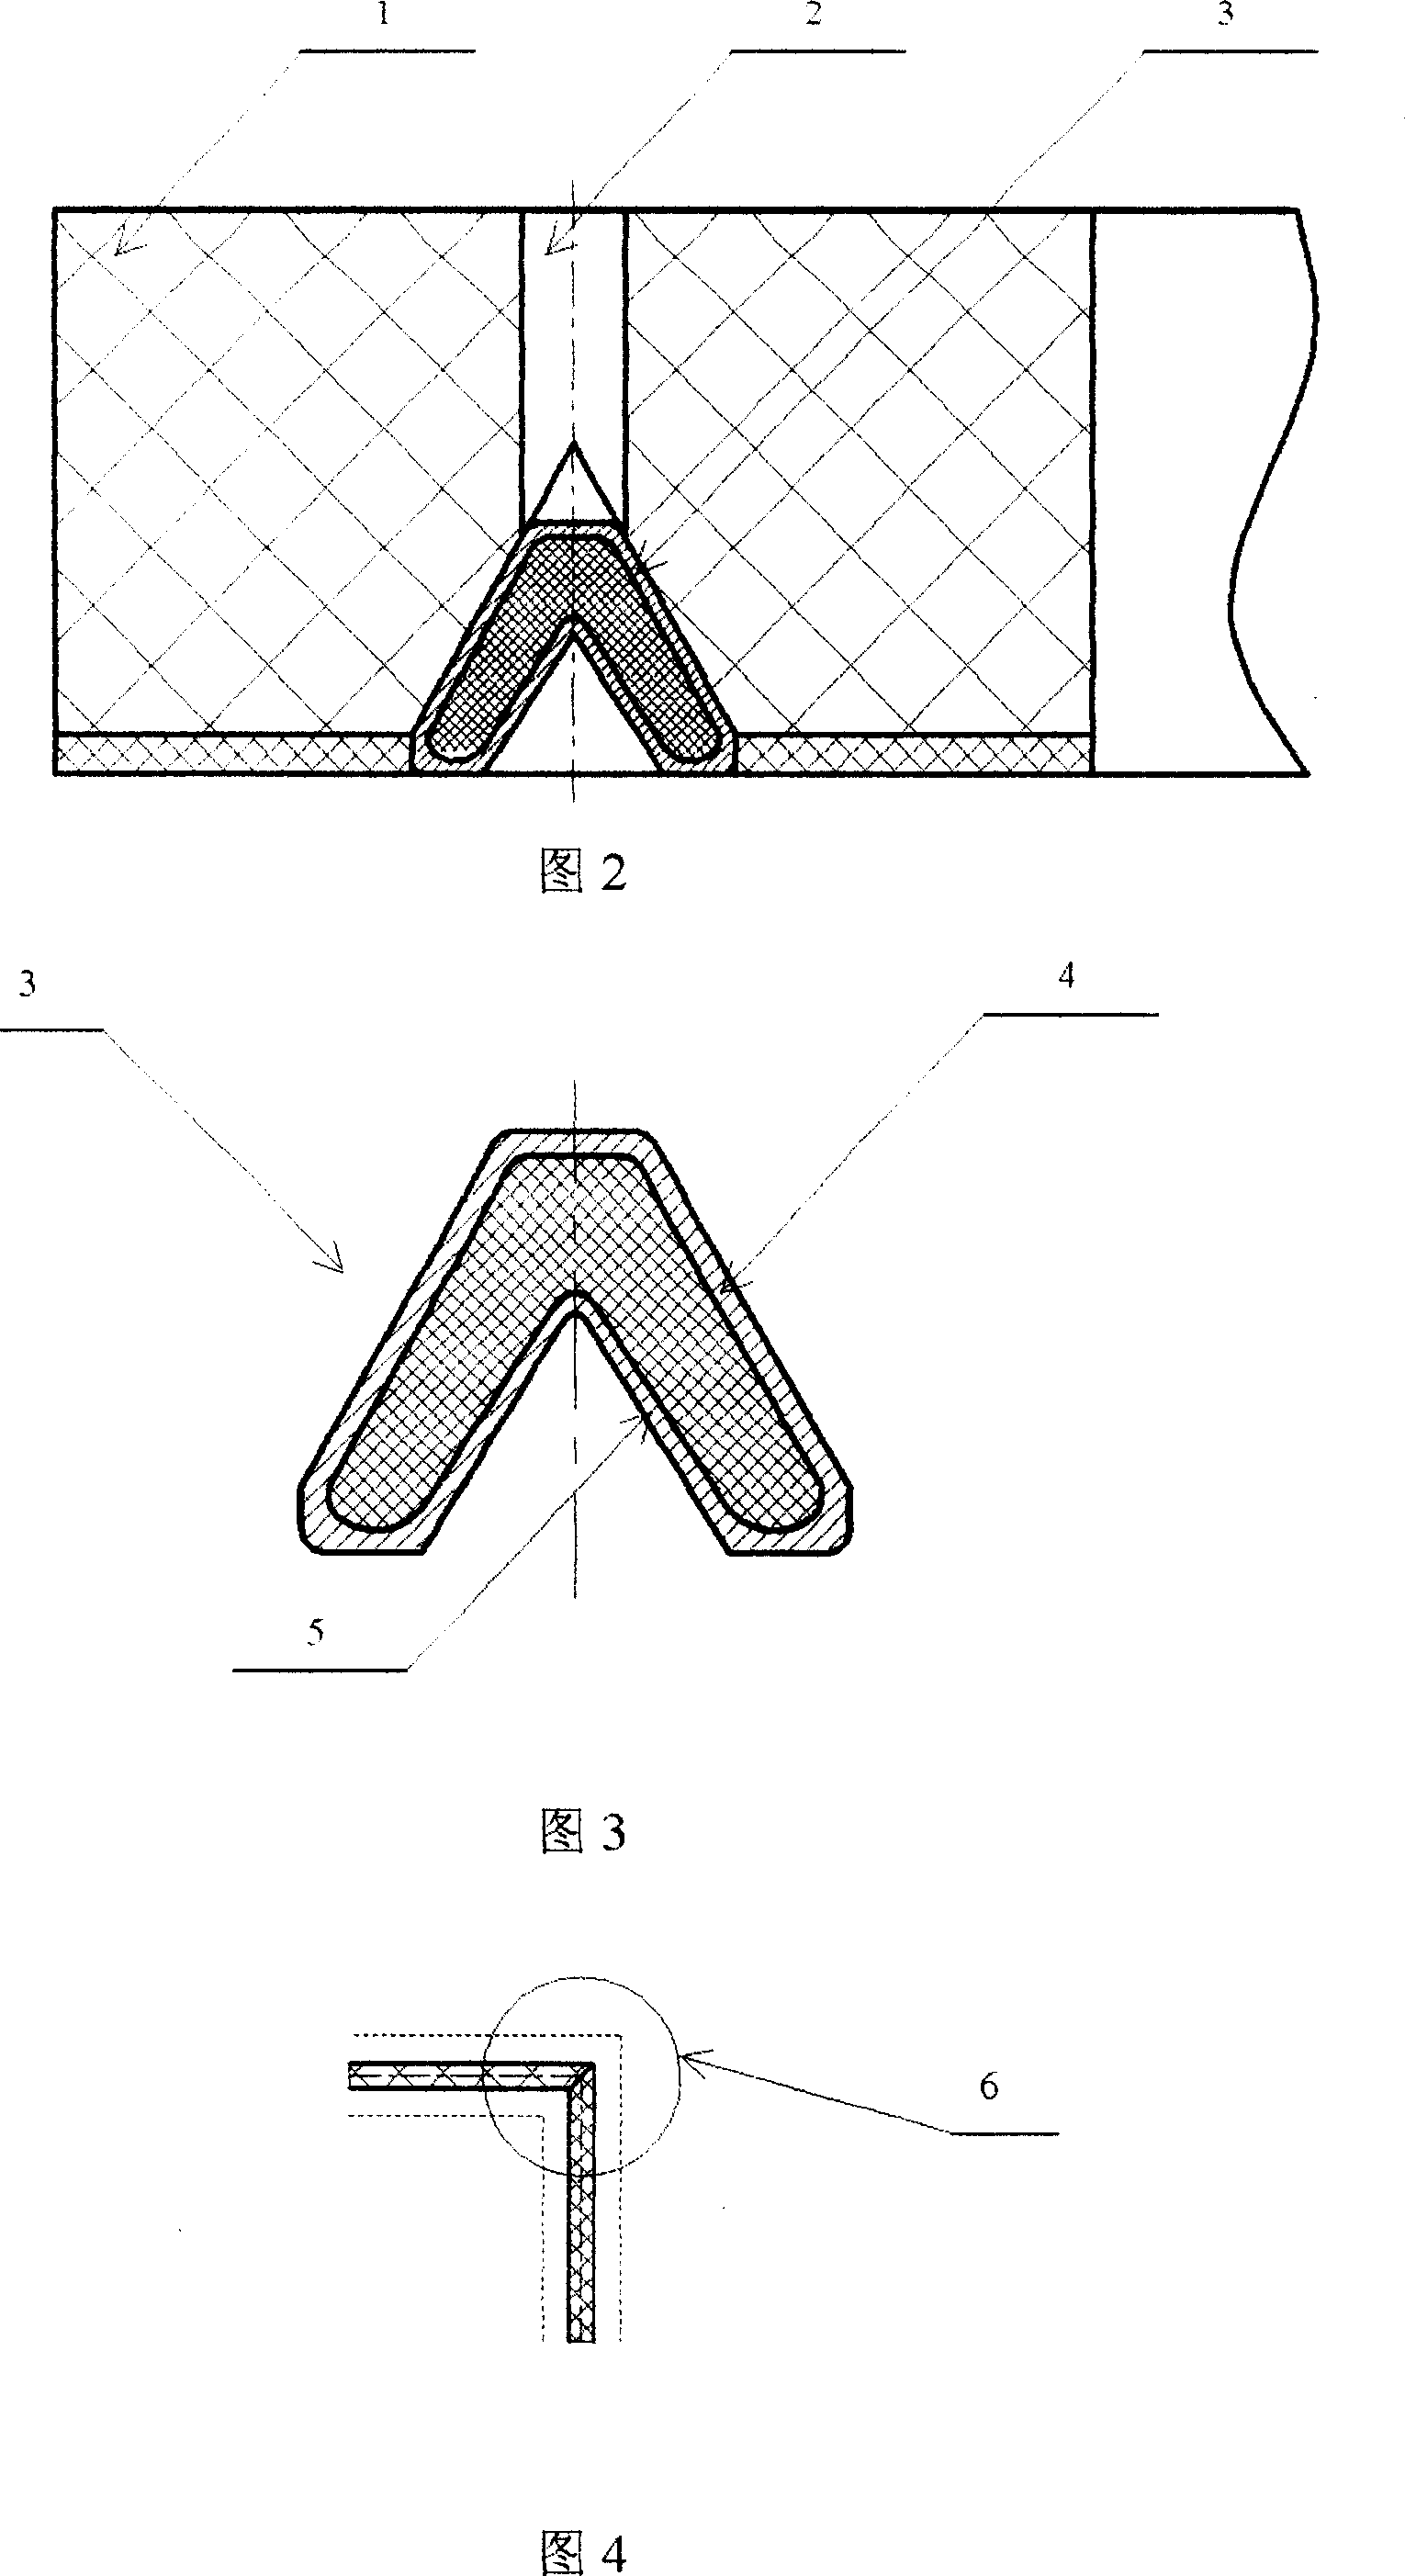 Plane-cabin energy-collected cutting apparatus